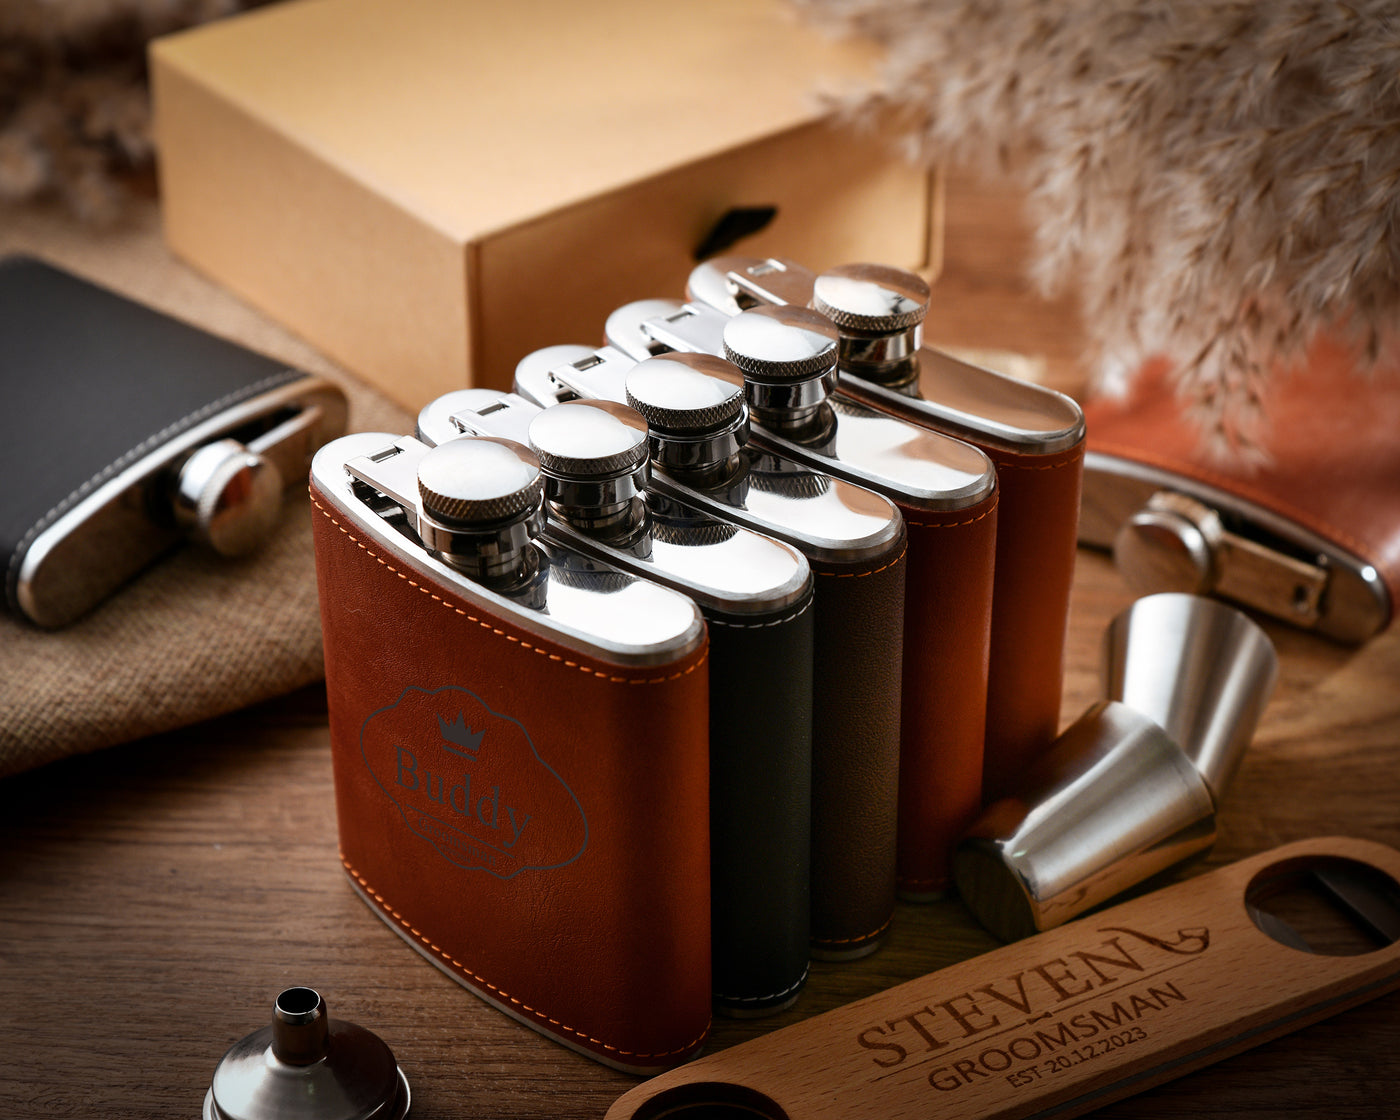 Groomsmen Gifts Set Personalized Flask Bachelor Party Proposal Gift Custom Engraved Flask Best Man Gift Idea